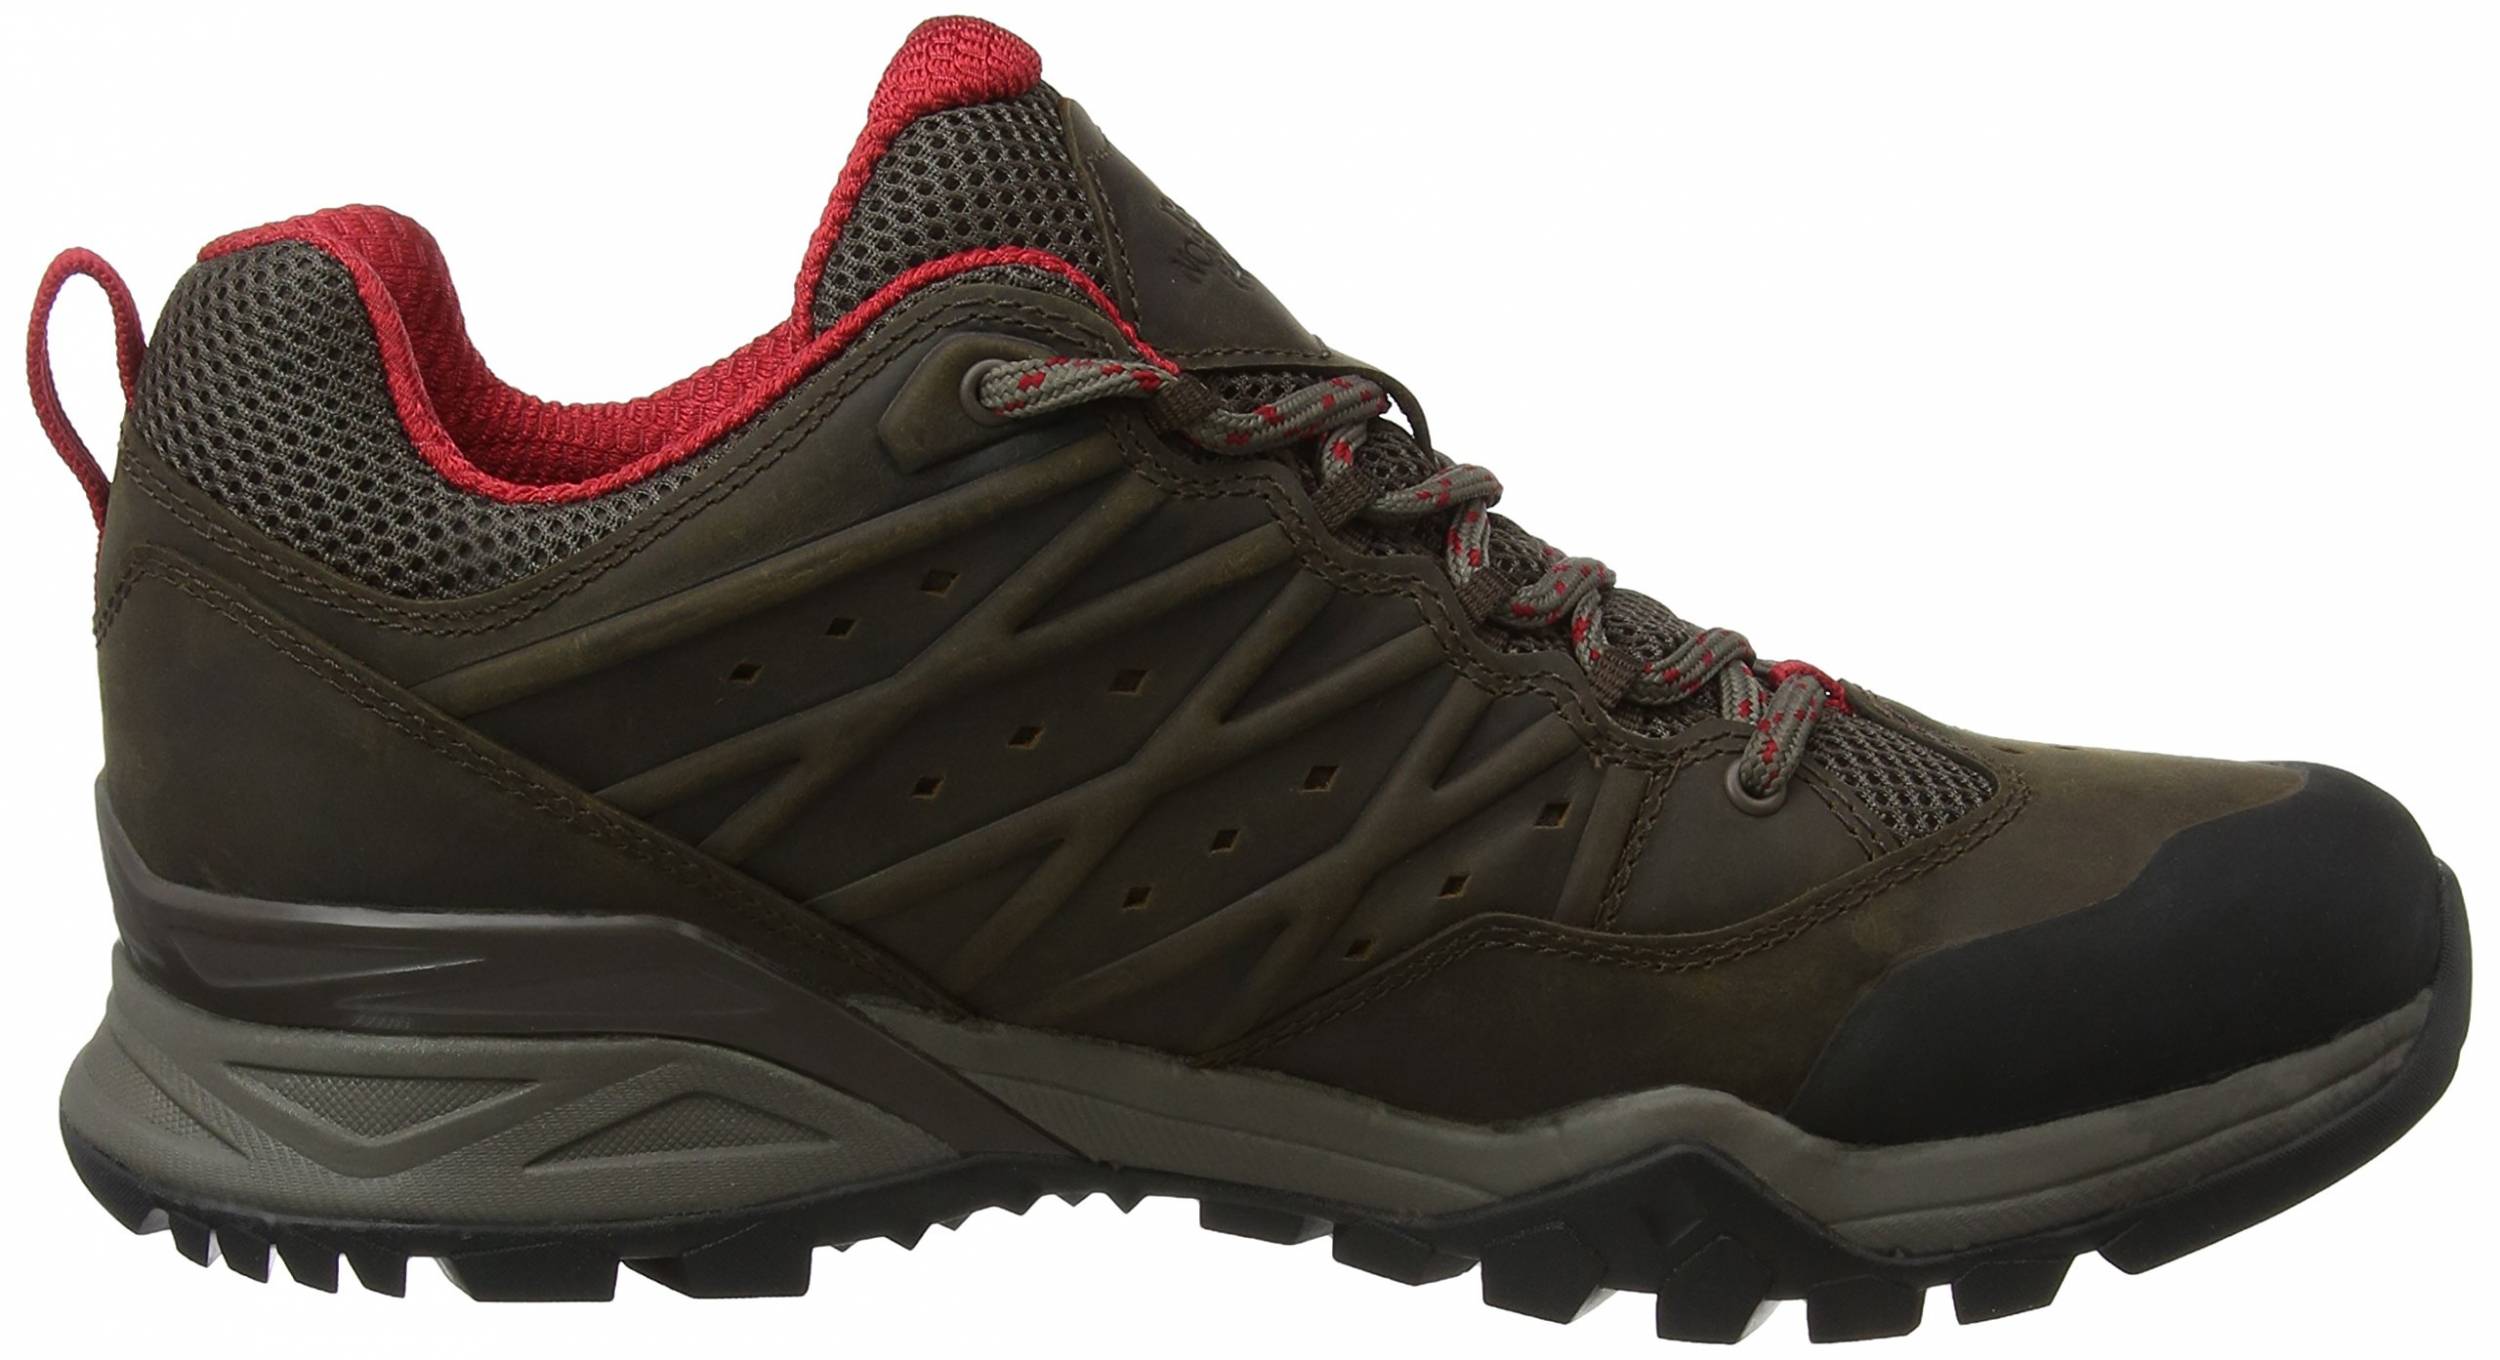 Save 18% on The North Face Hiking Shoes 